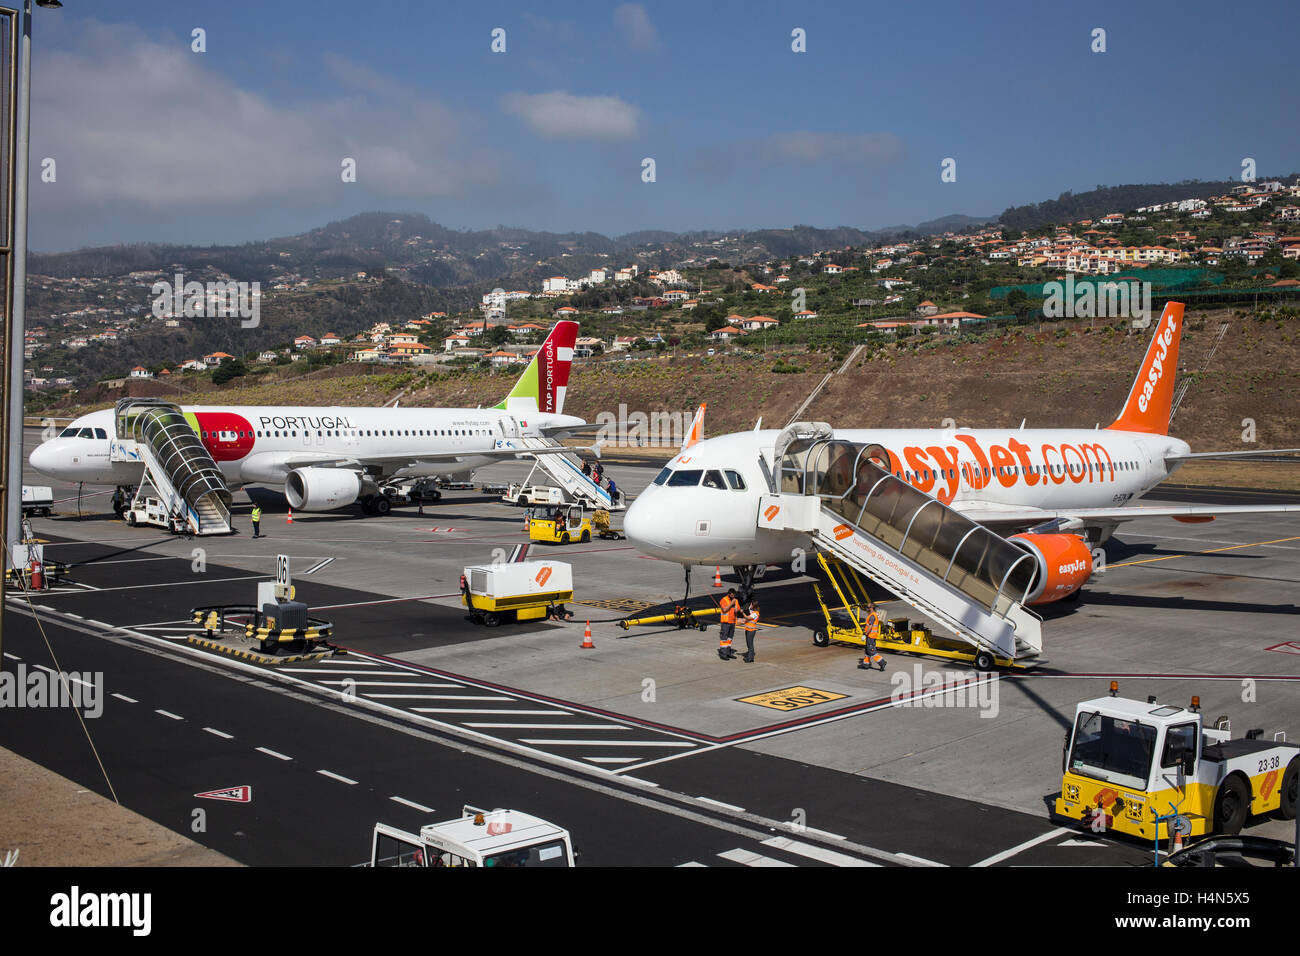 Eastjet & TAP Portugal Airlines A320 Planes at Madeira Airport, Funchal Stock Photo